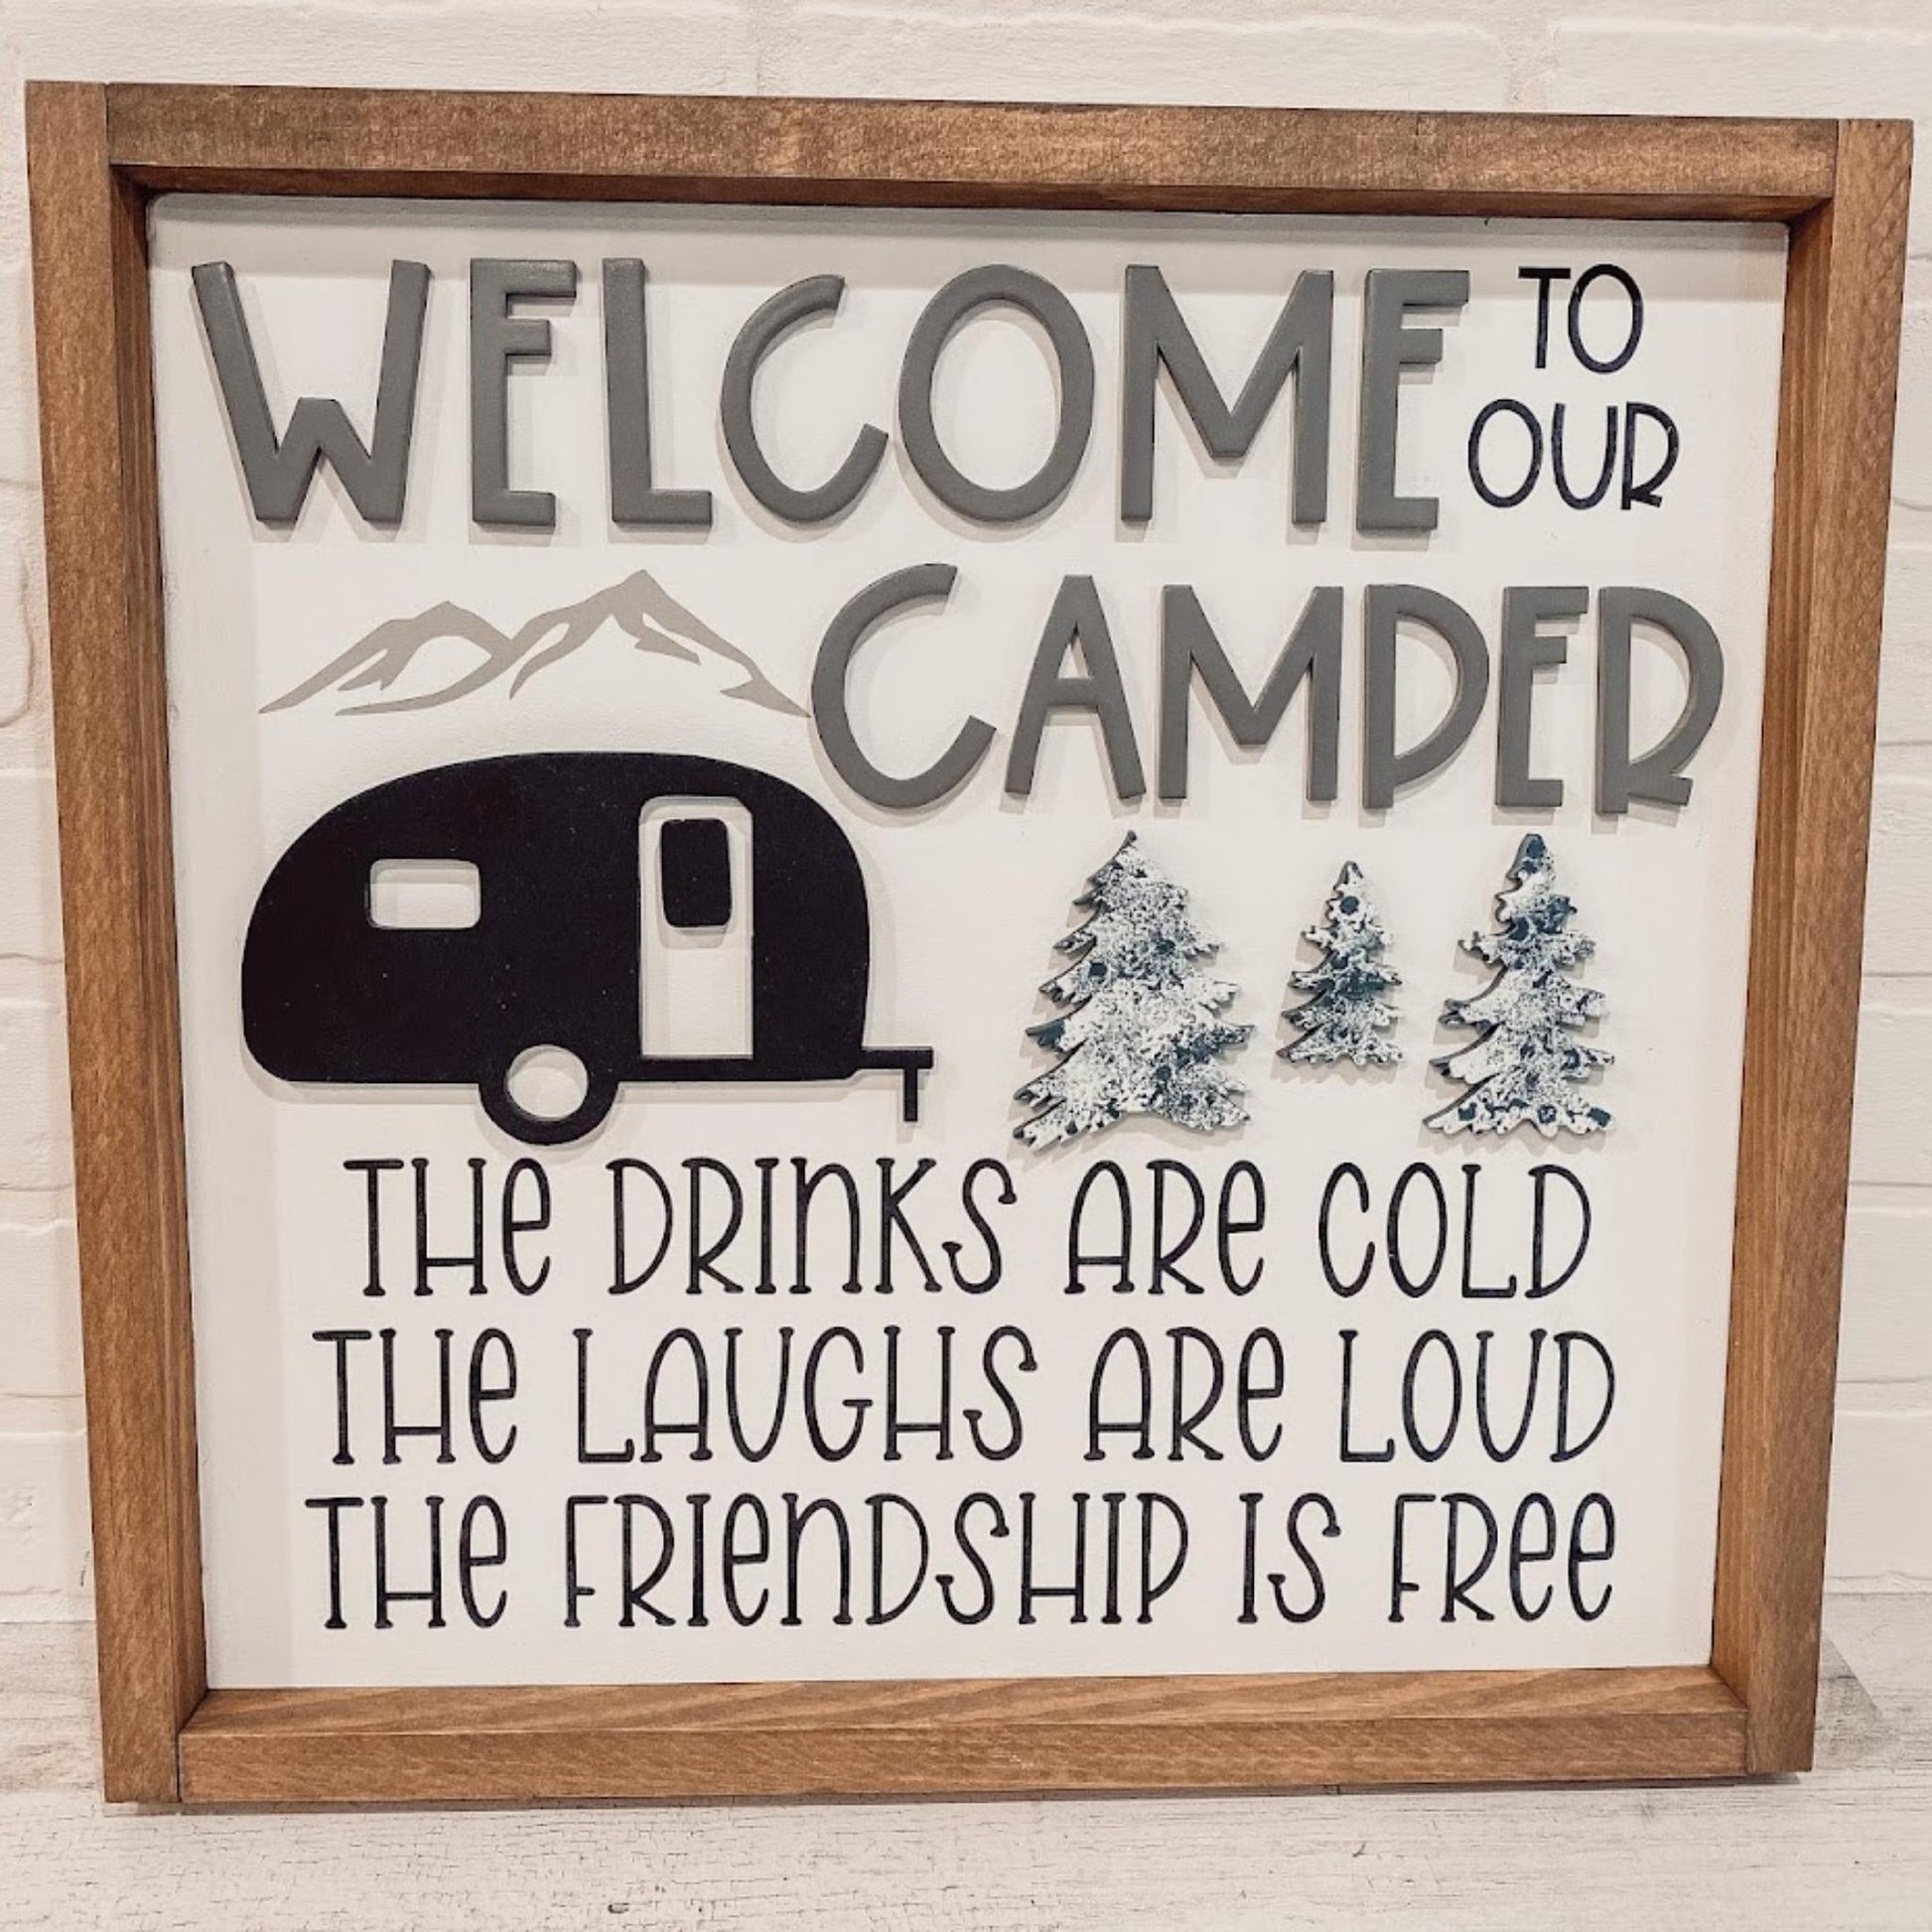 WELCOME TO OUR CAMPER - B-Cozy Home Decor